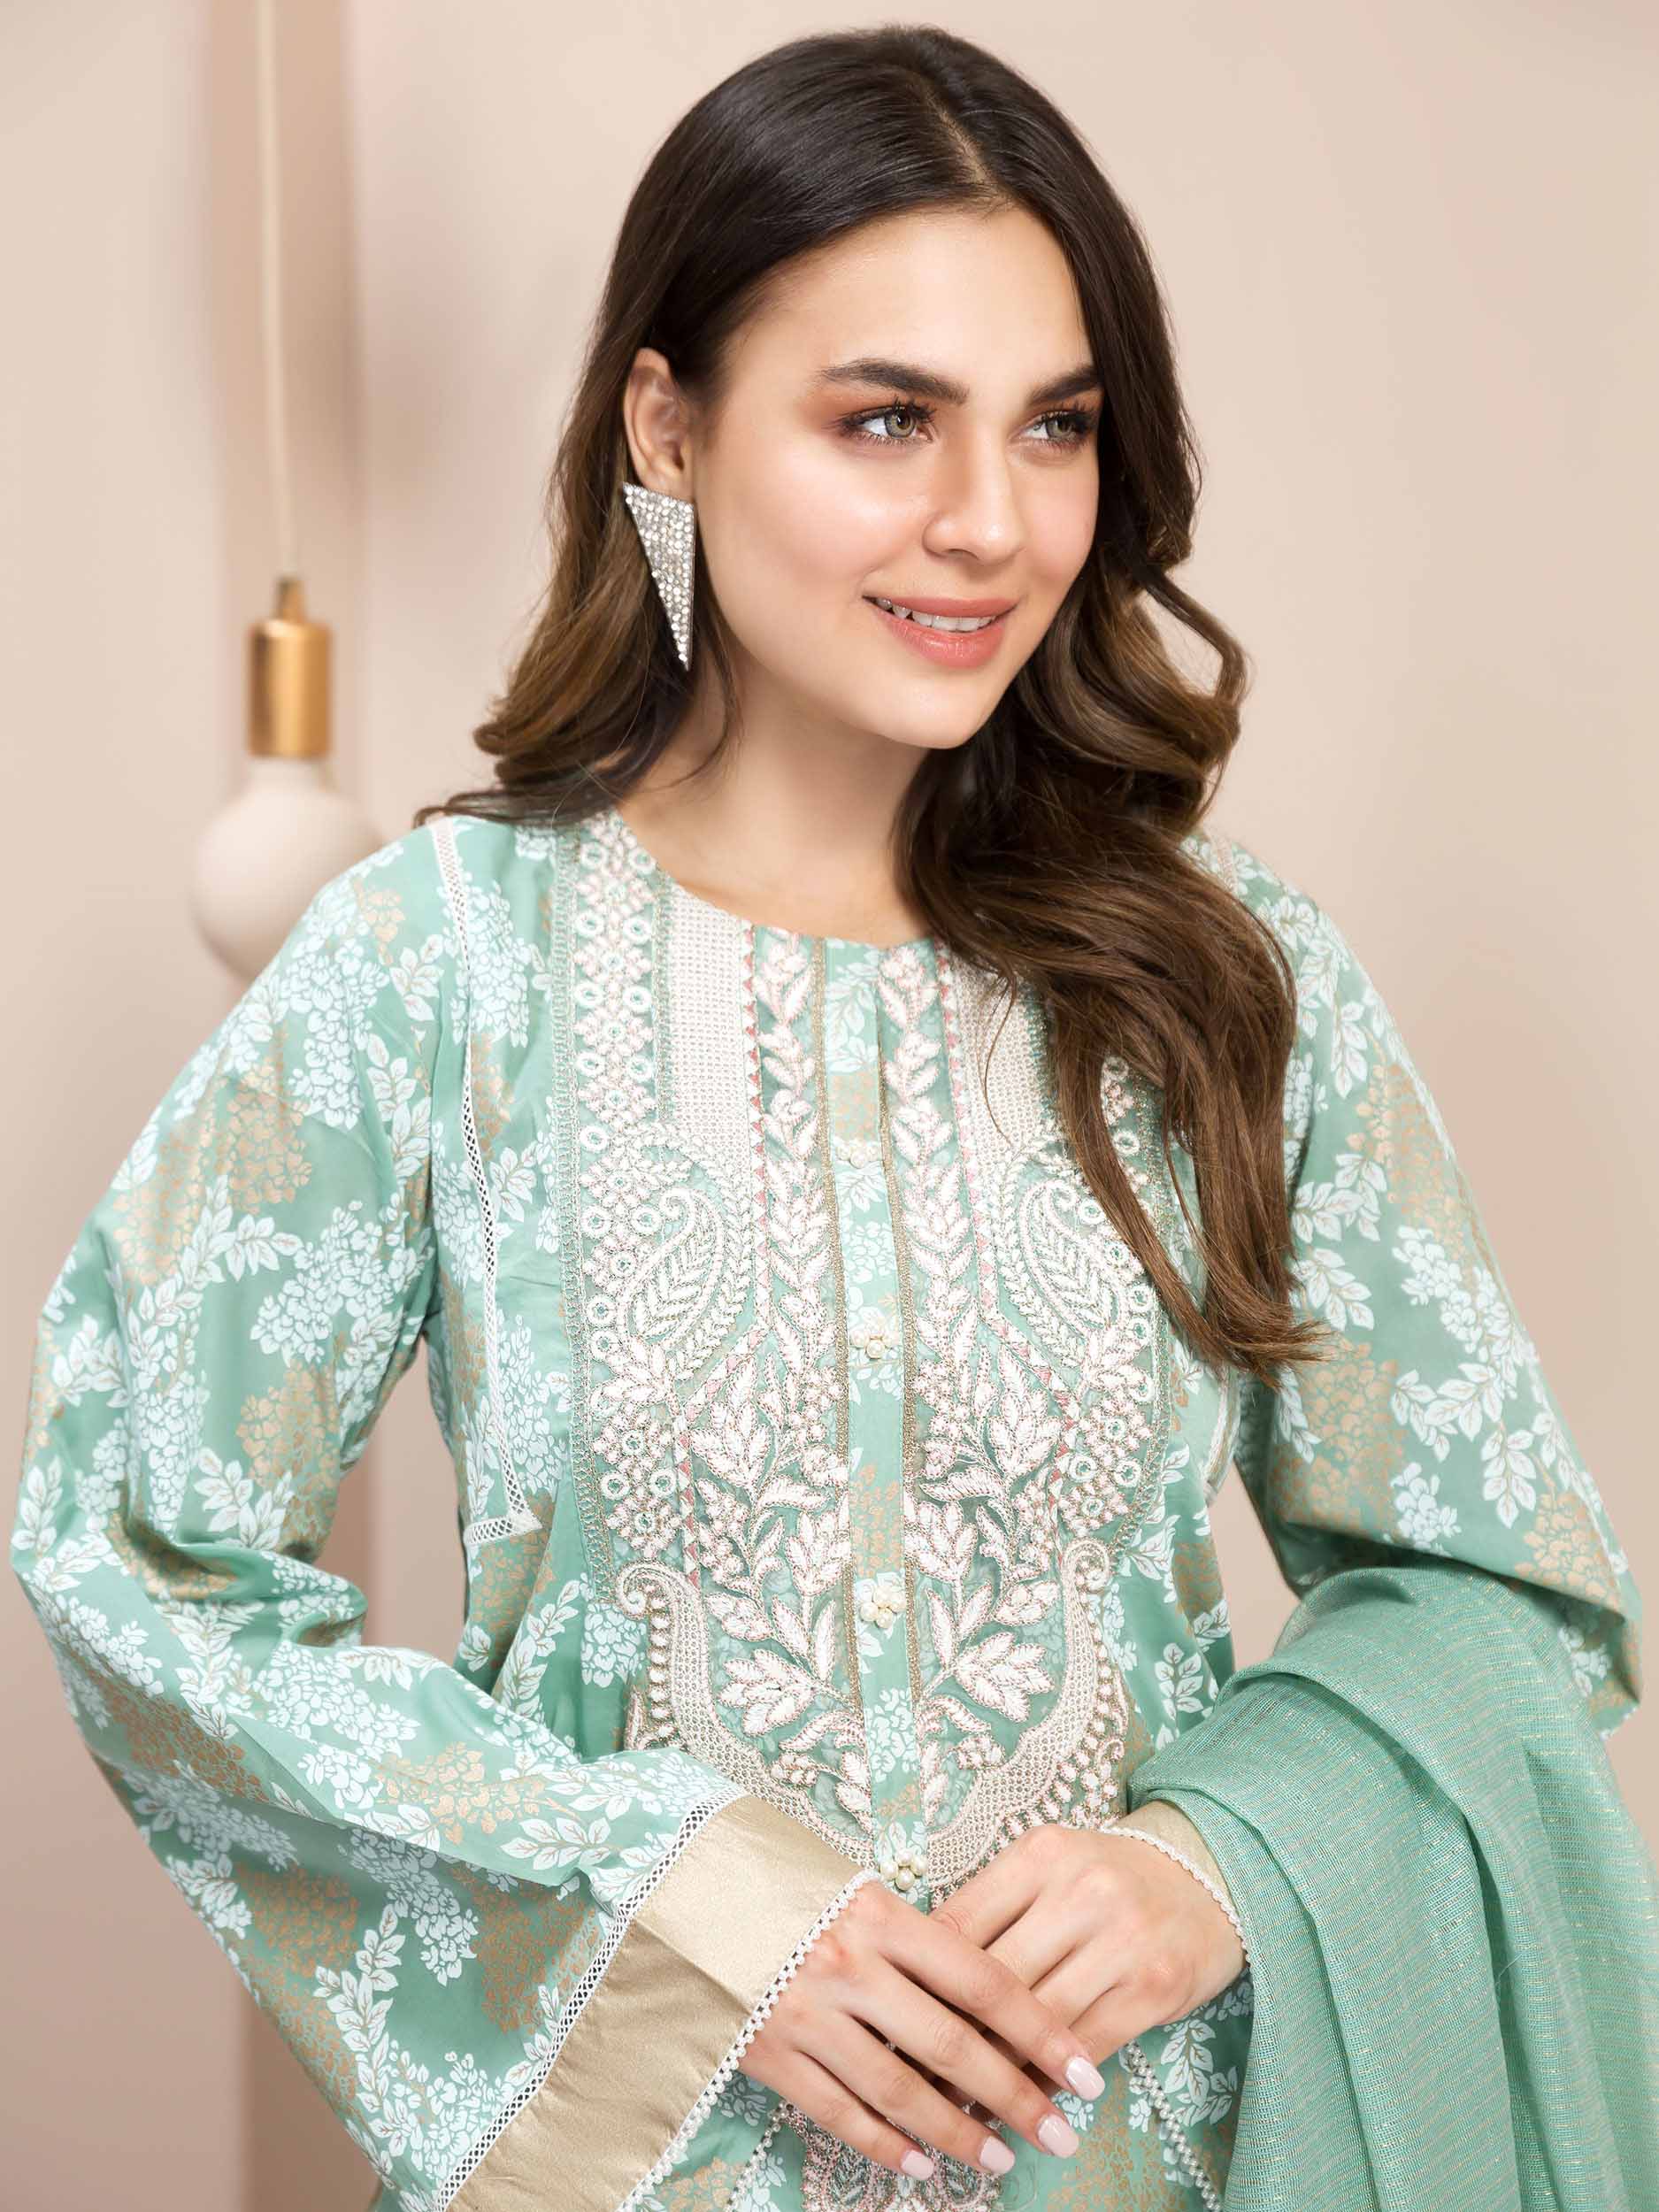 Limelight Eid 2021: Pick The Girls Dresses That Have Your Heart